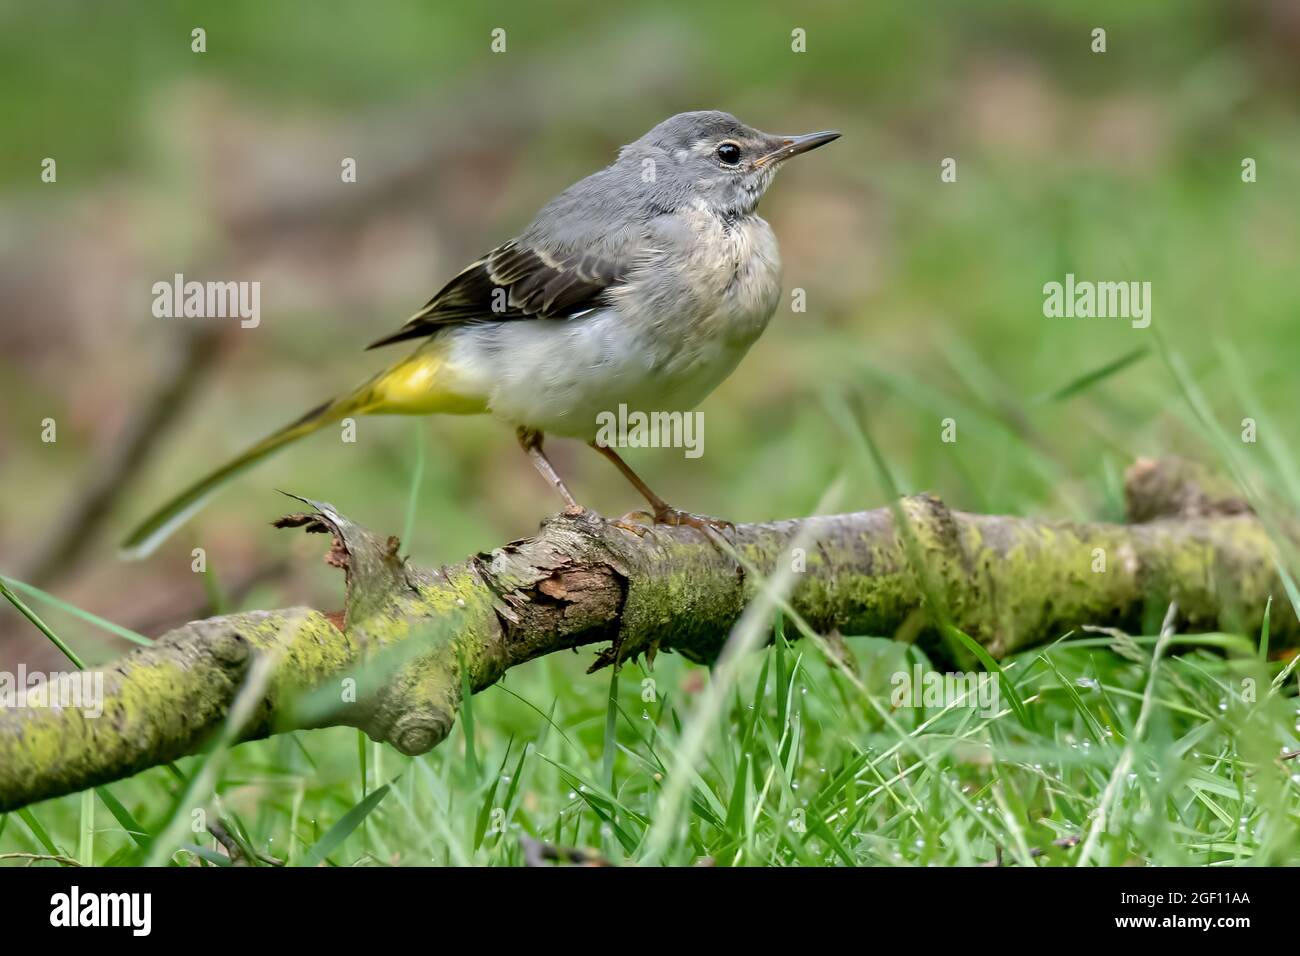 Juvenile grey wagtail perched on a branch laying on the ground, Cannock Chase, Staffordshire. Stock Photo